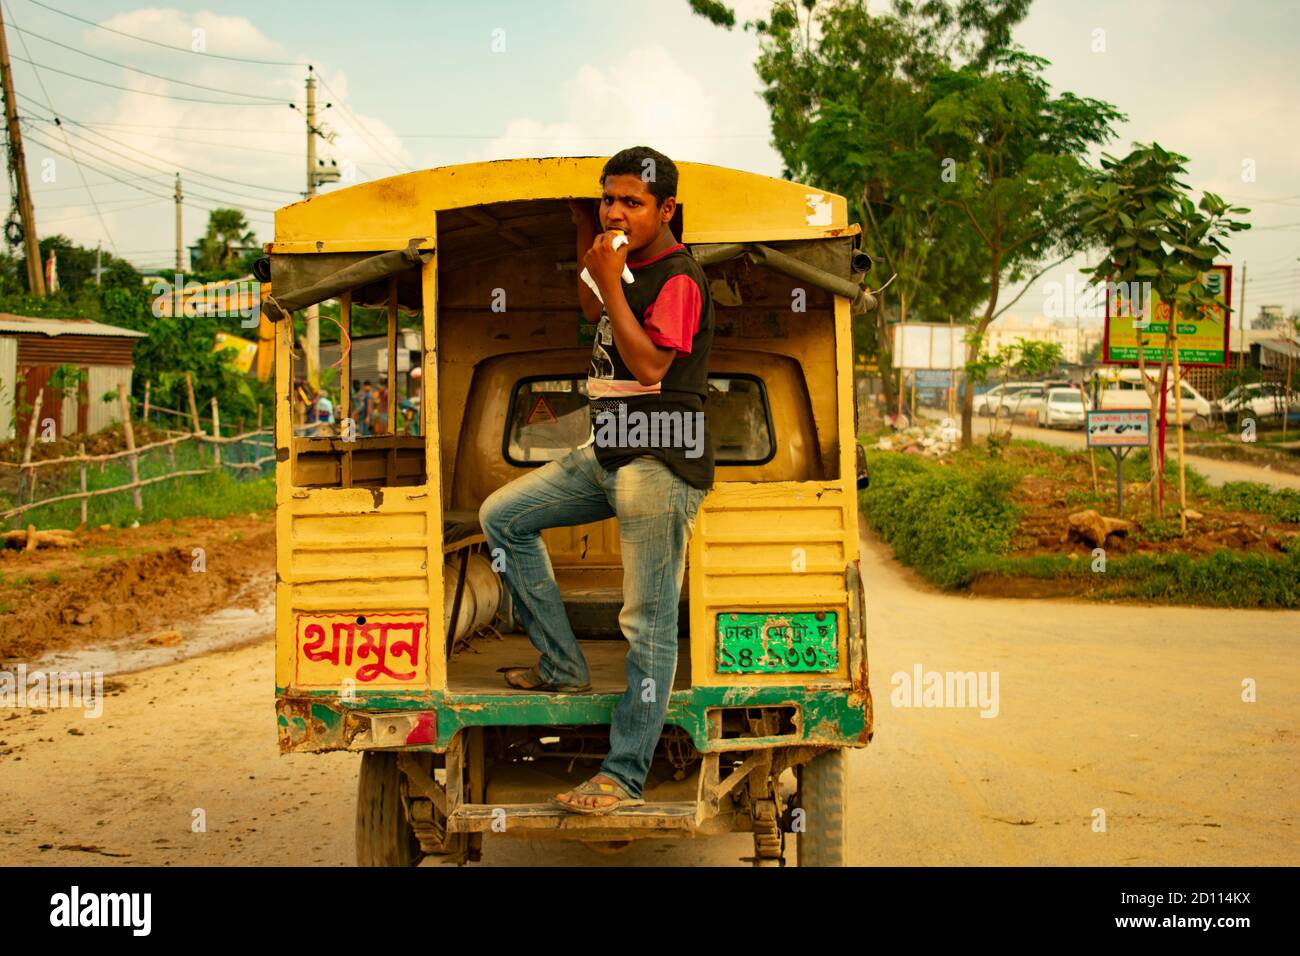 DHAKA, BANGLADESH- SEPTEMBER 30, 2020 : portrait of a local Bus contractor in Dhaka who was eating food in bus, working with ricks Stock Photo